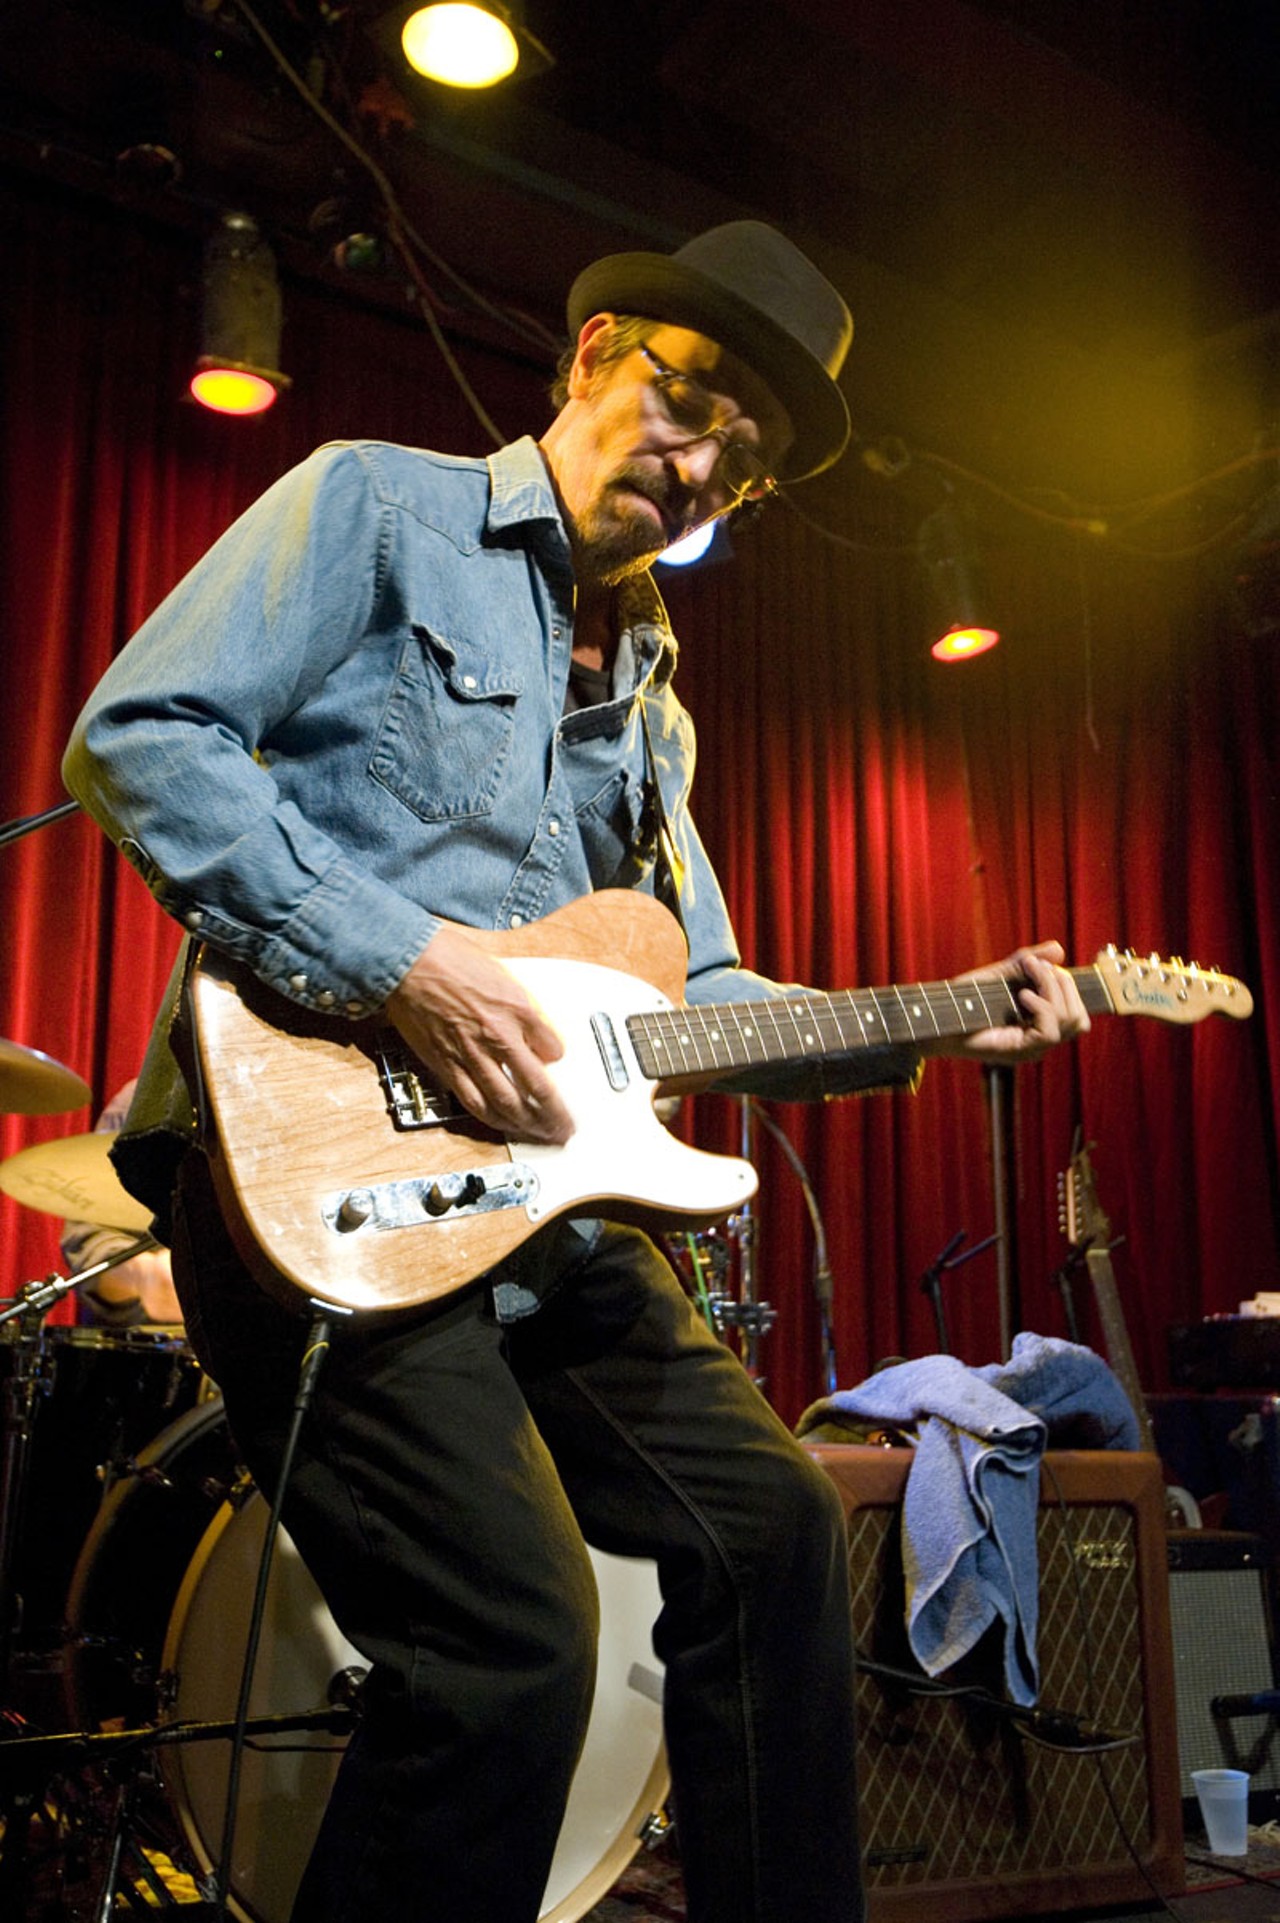 Marshall Crenshaw and The Bottle Rockets at Off Broadway